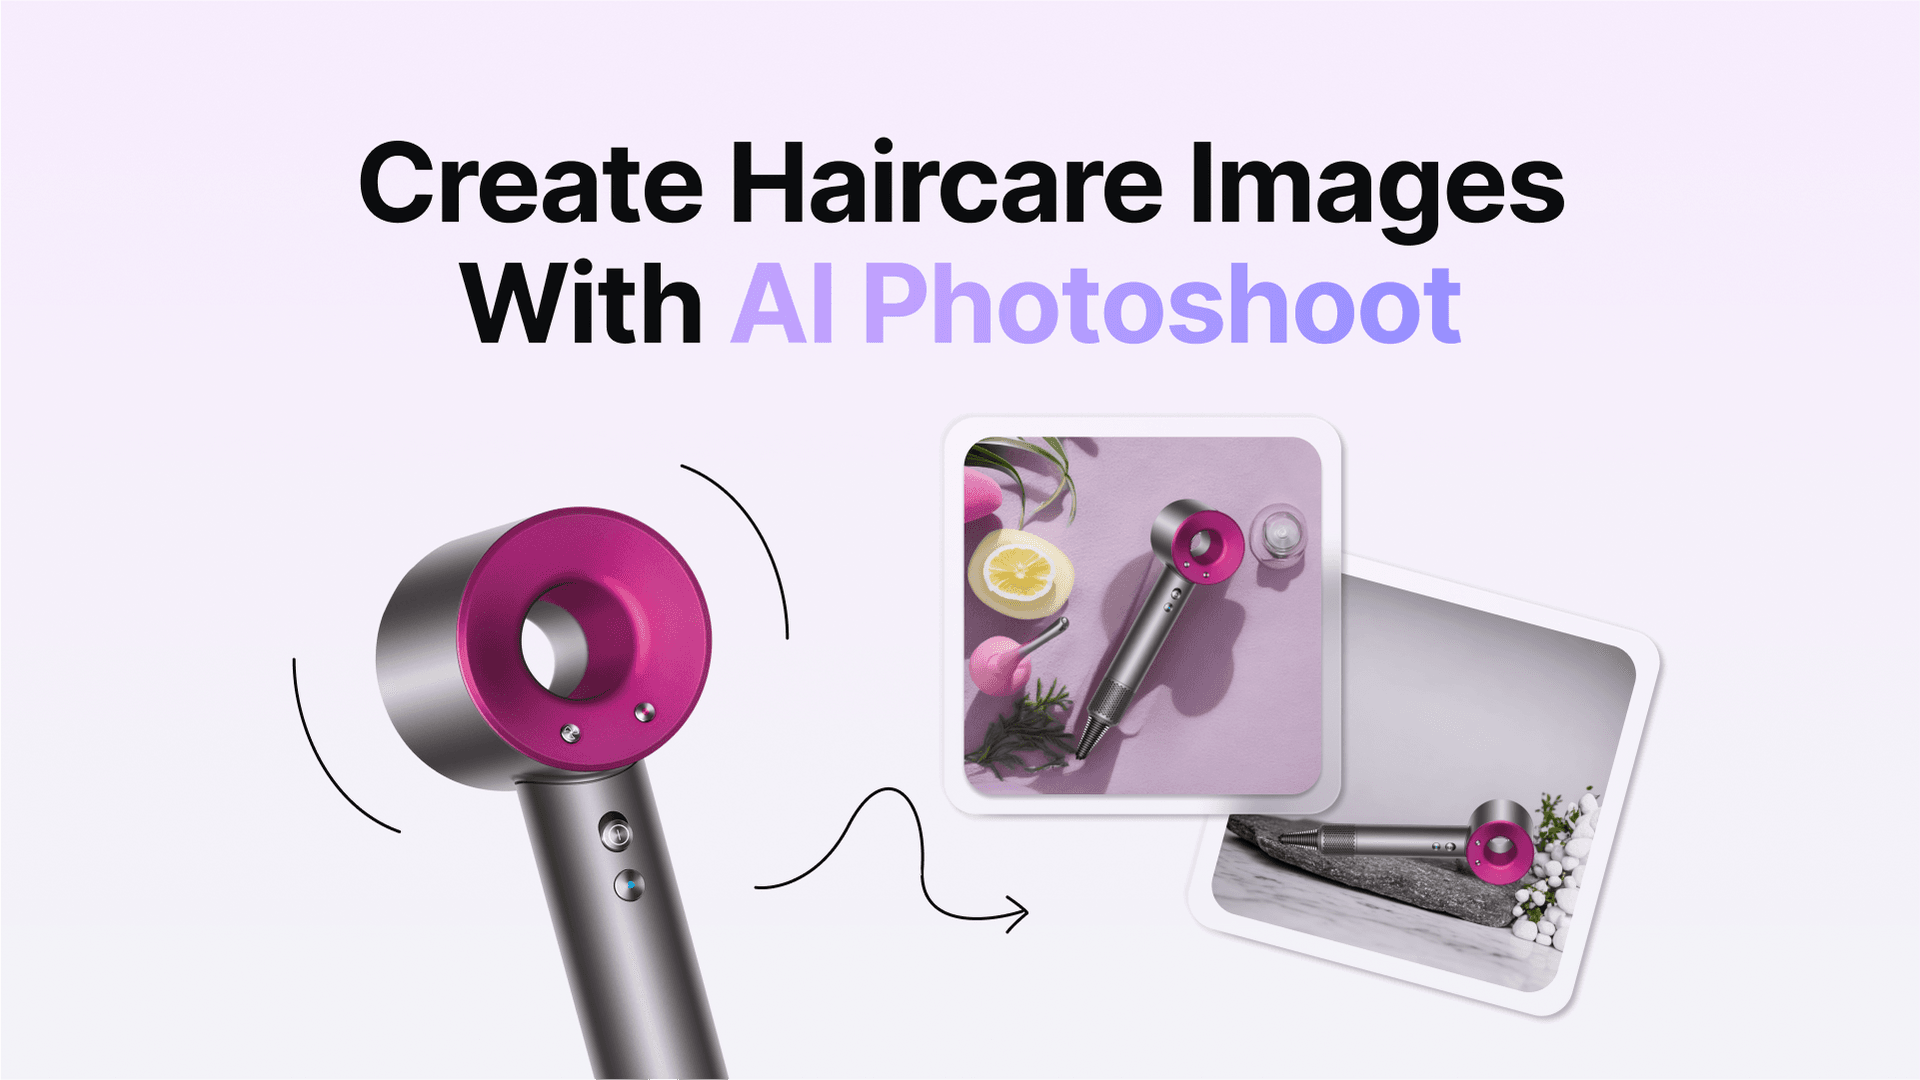 Picture for AI Photoshoot Tutorial for Haircare Products article